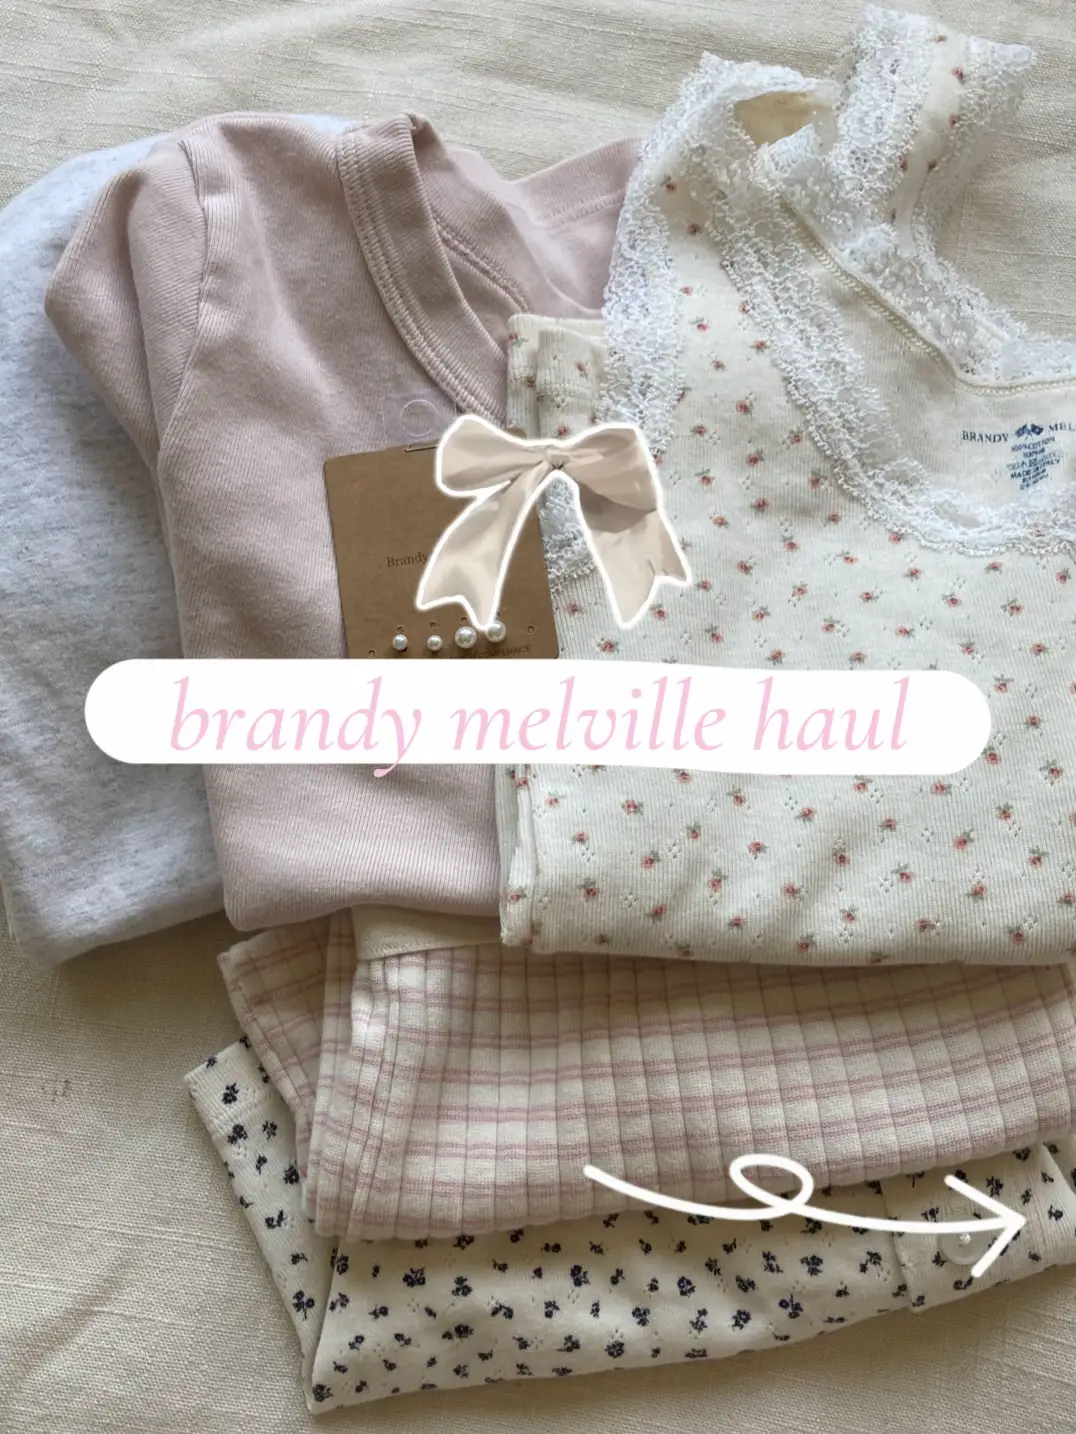 Brandy Melville Bonnie Top - $20 - From Mia